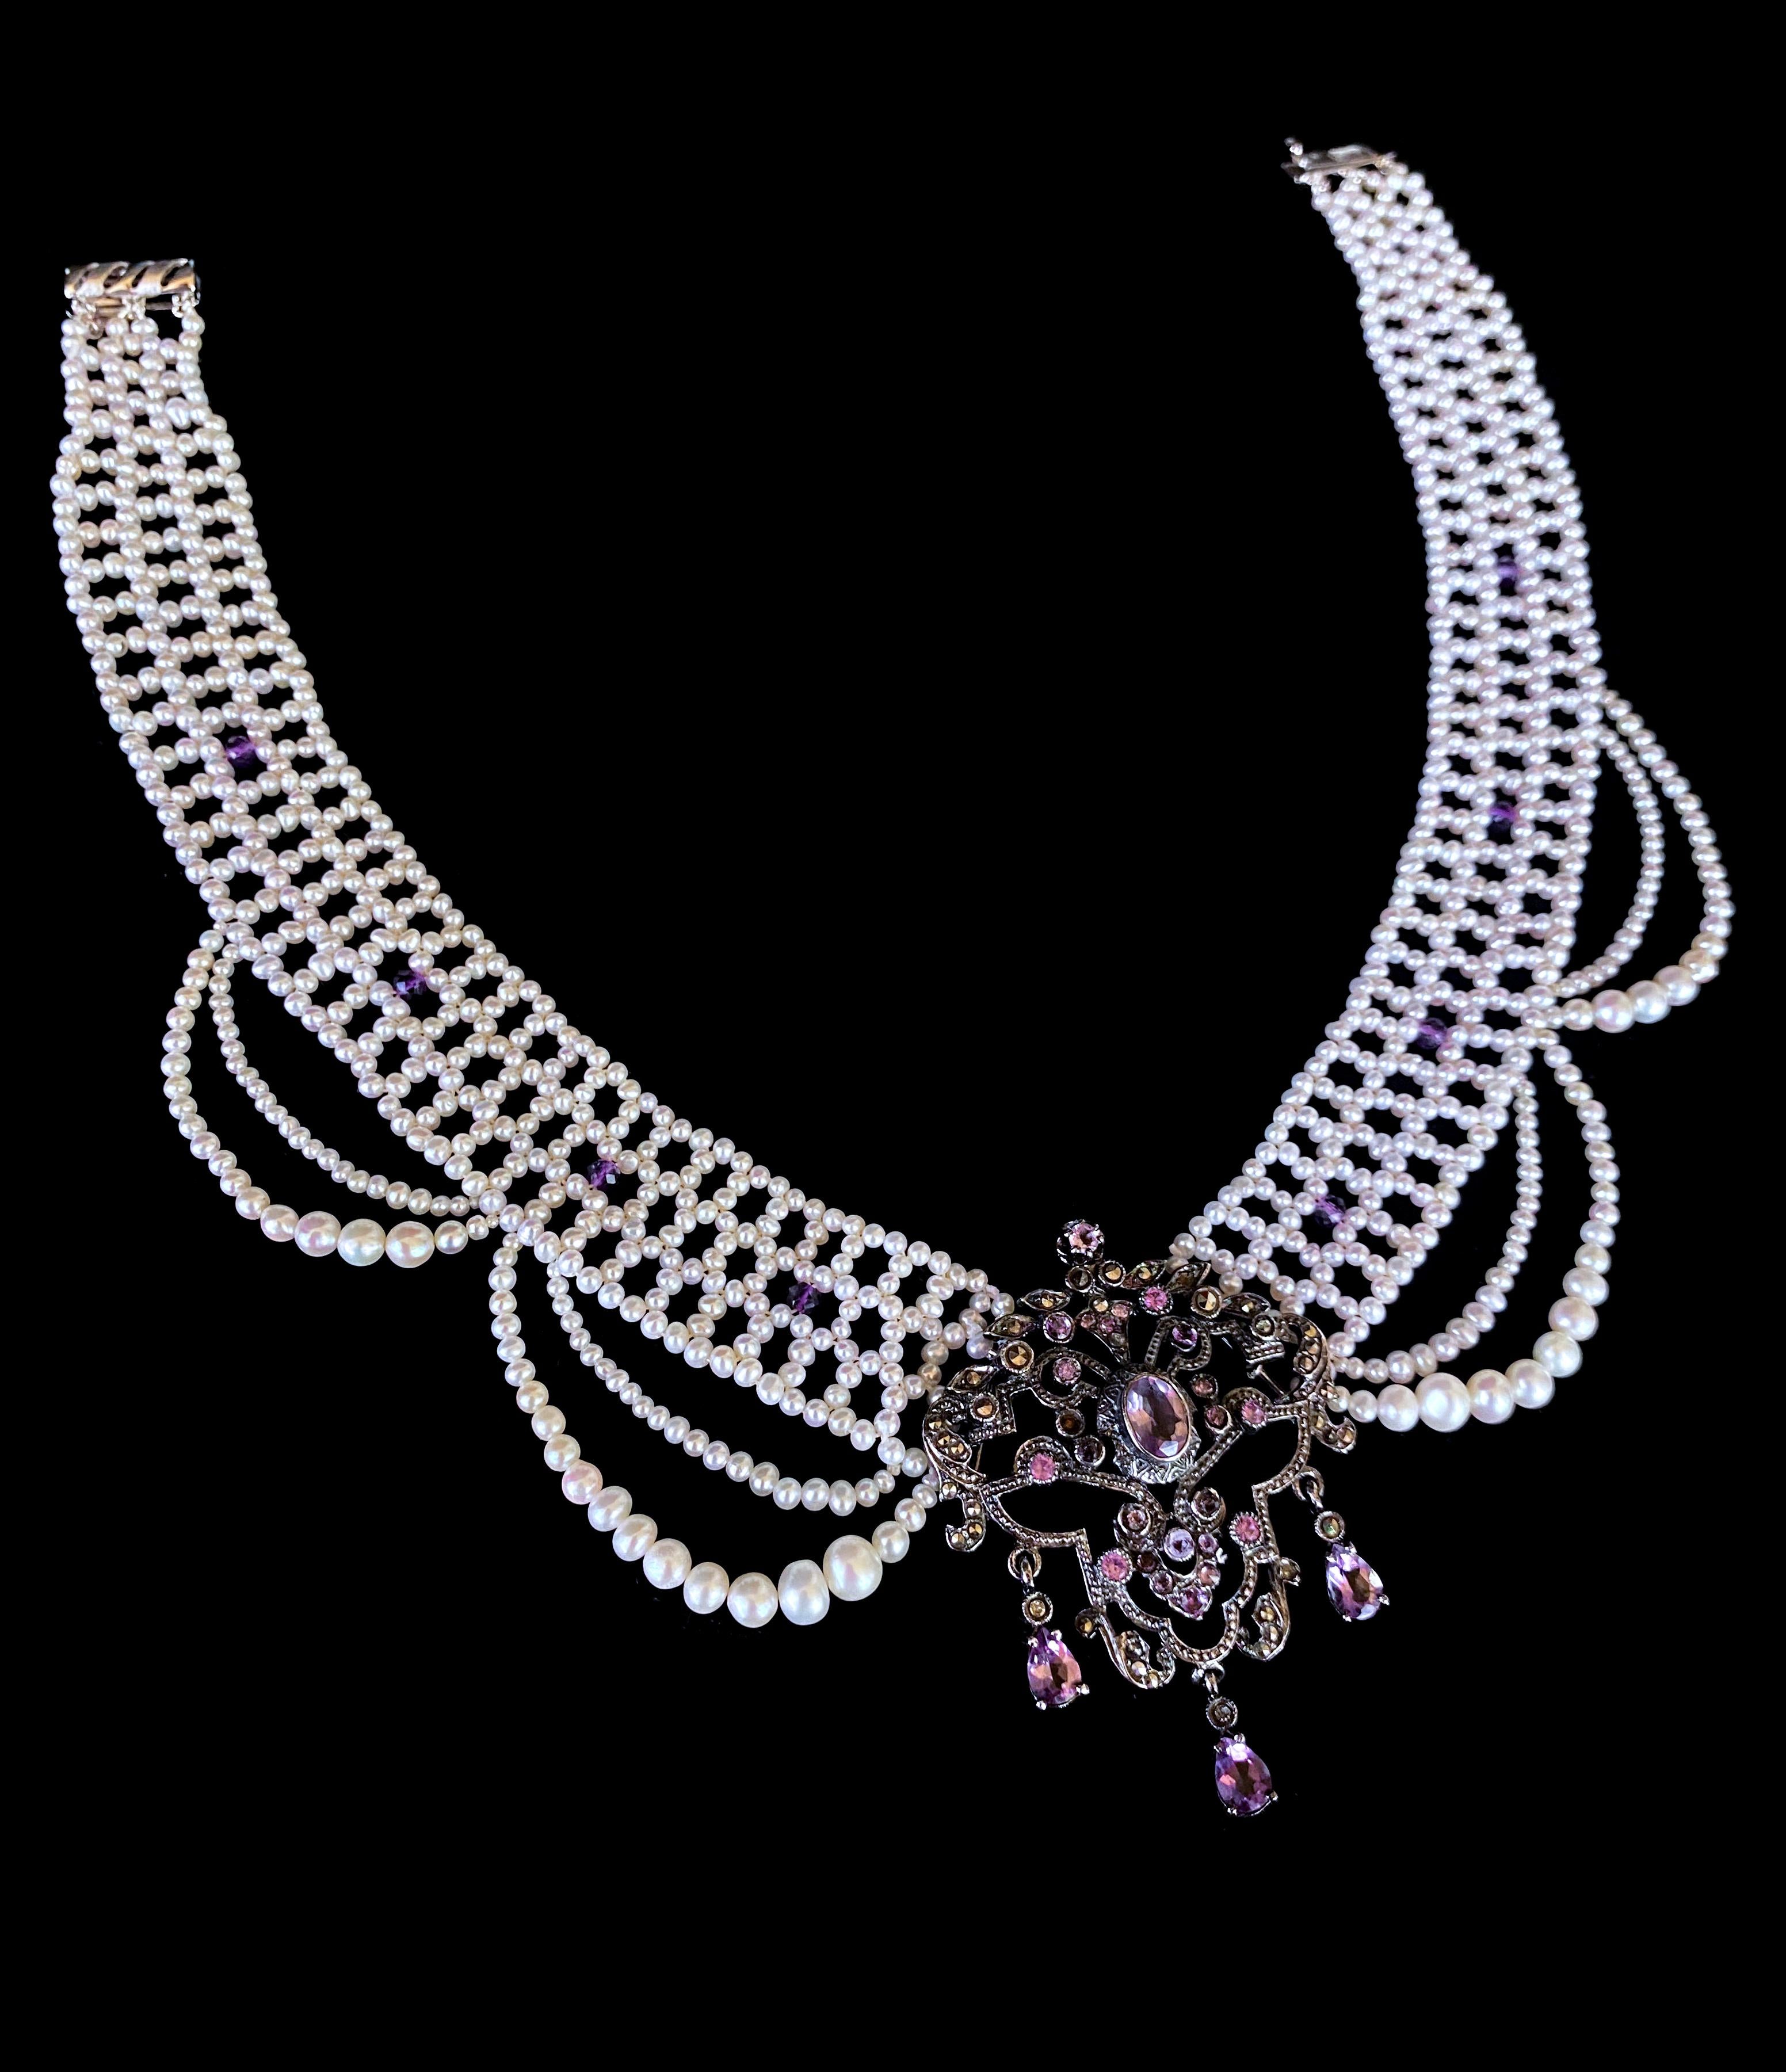 Marina J. Unique Pearl Draped Necklace with Vintage Amethyst Silver Centerpiece In New Condition For Sale In Los Angeles, CA